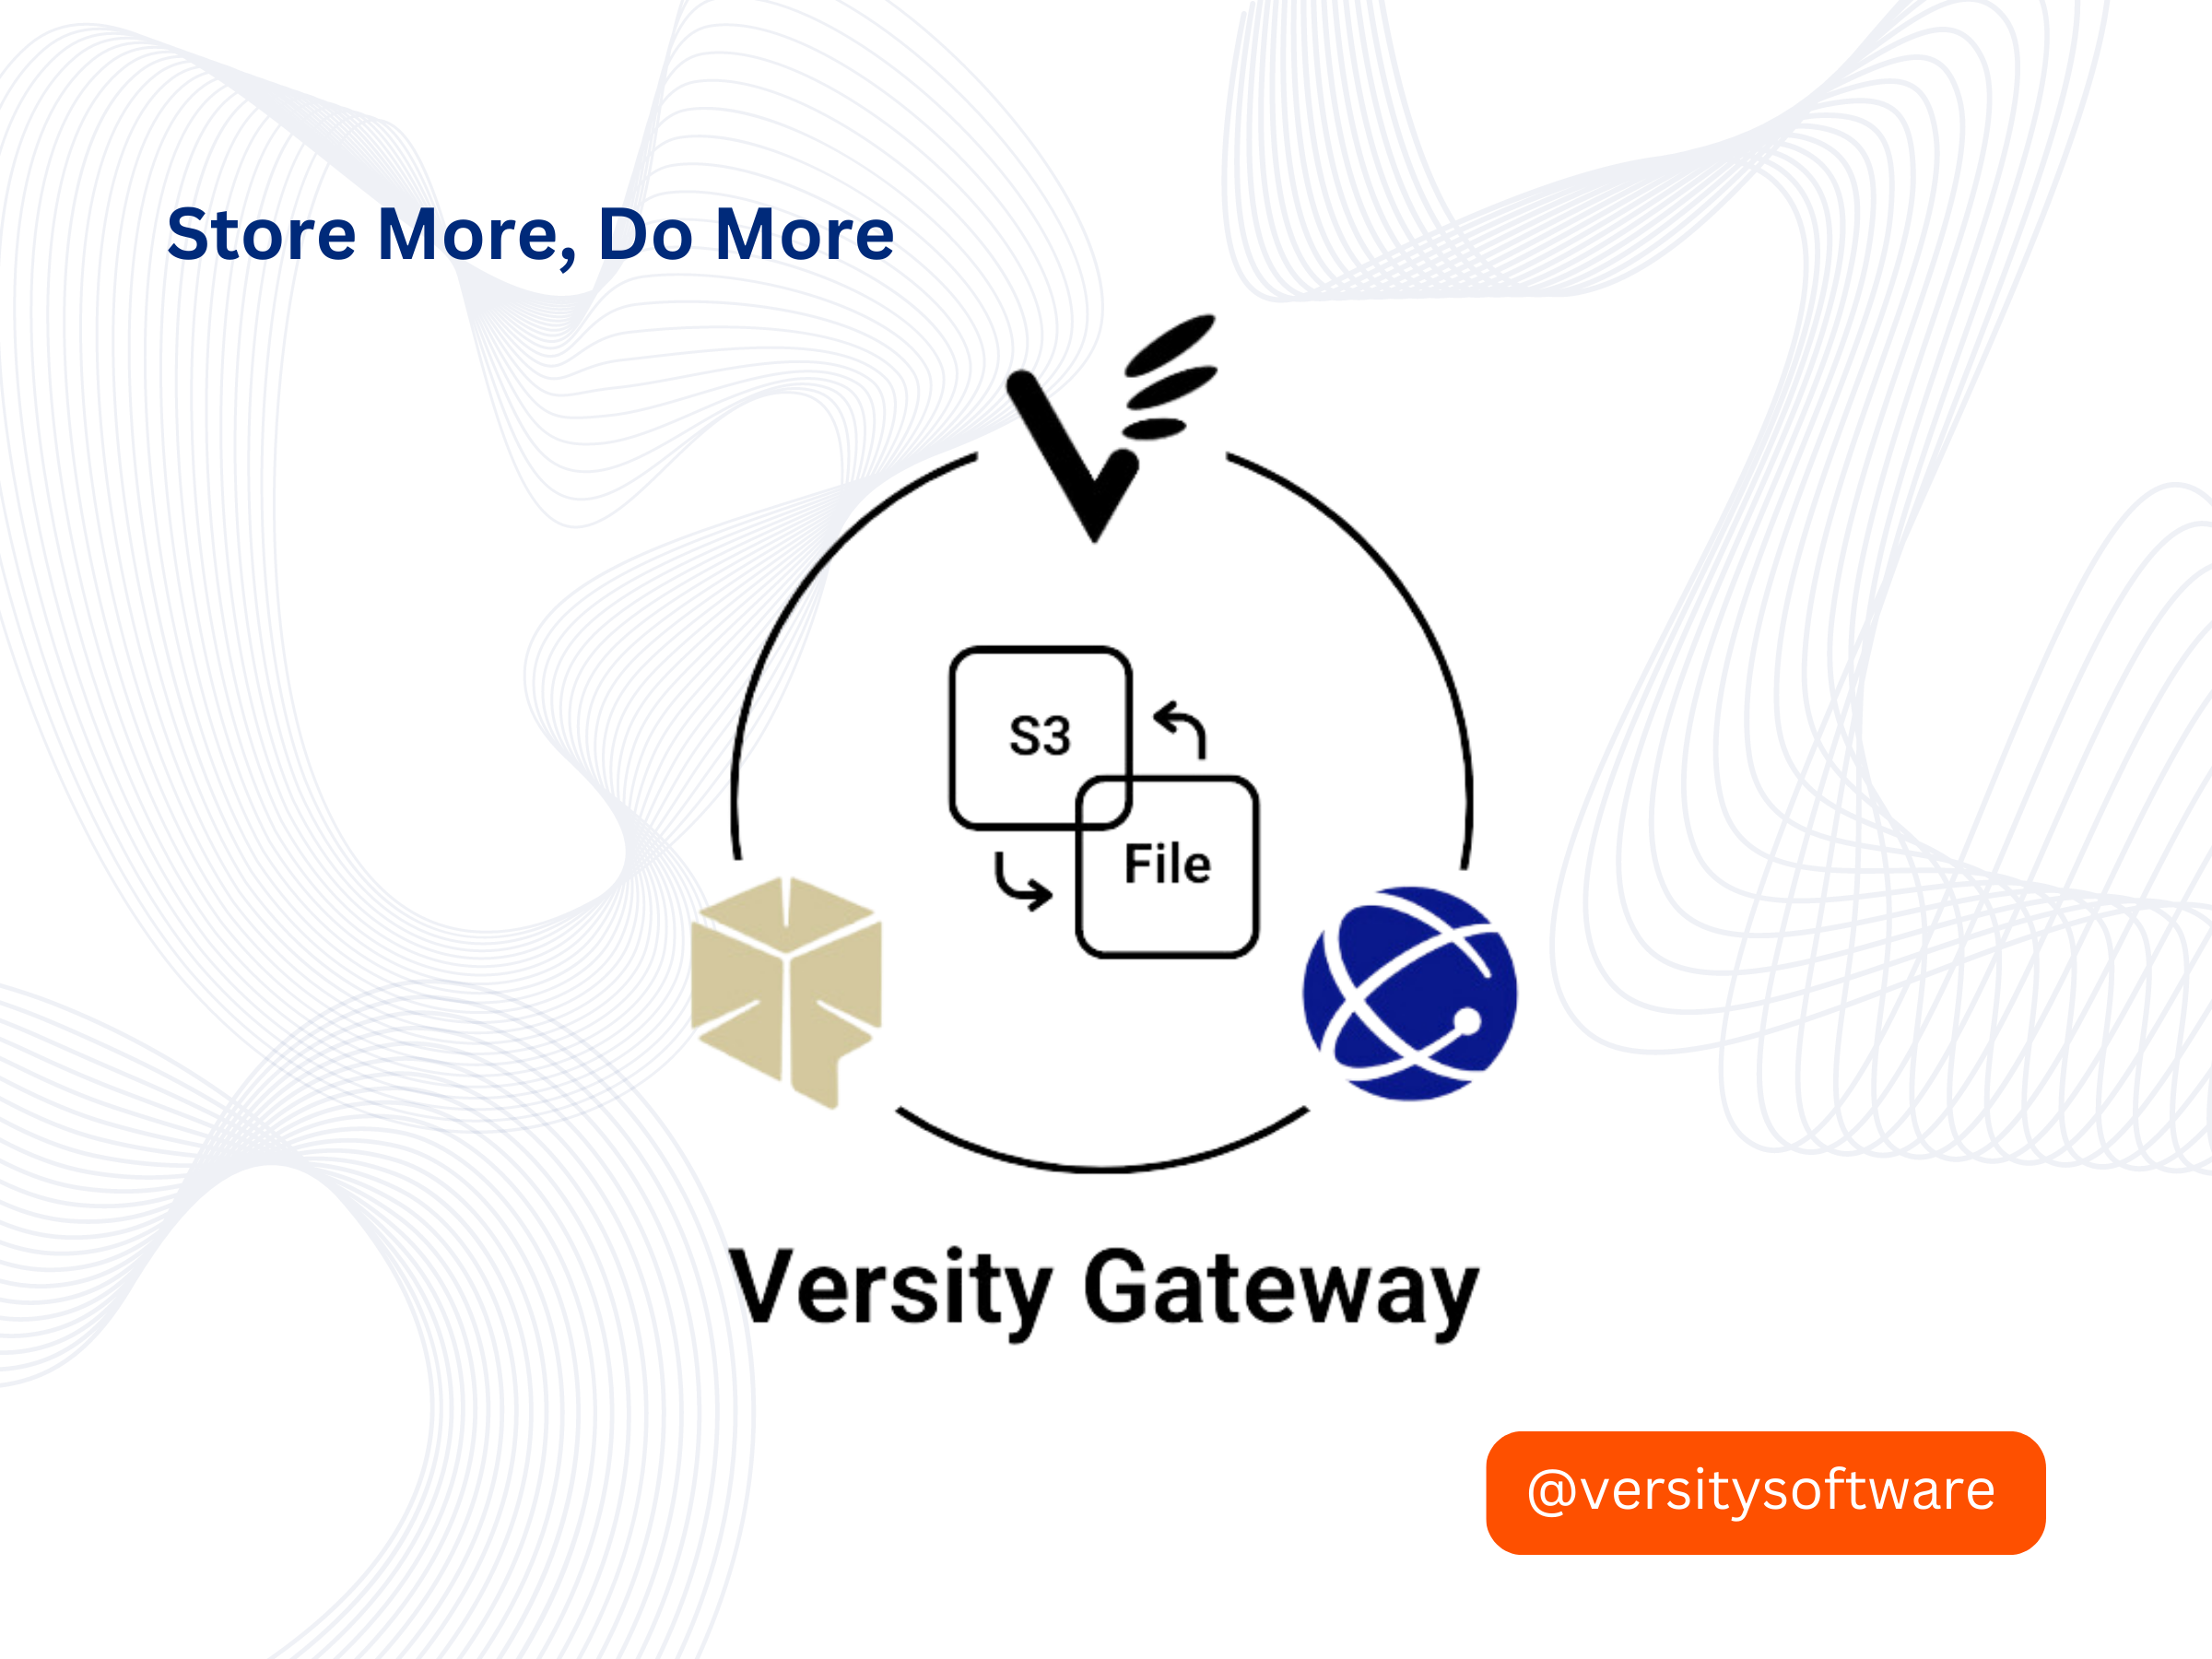 Versity, in collaboration with the Los Alamos National Laboratory and the Pawsey Supercomputing Research Centre, introduces the Versity Gateway, an innovative open source tool for seamless inline translation between AWS S3 object commands and file-based storage systems.